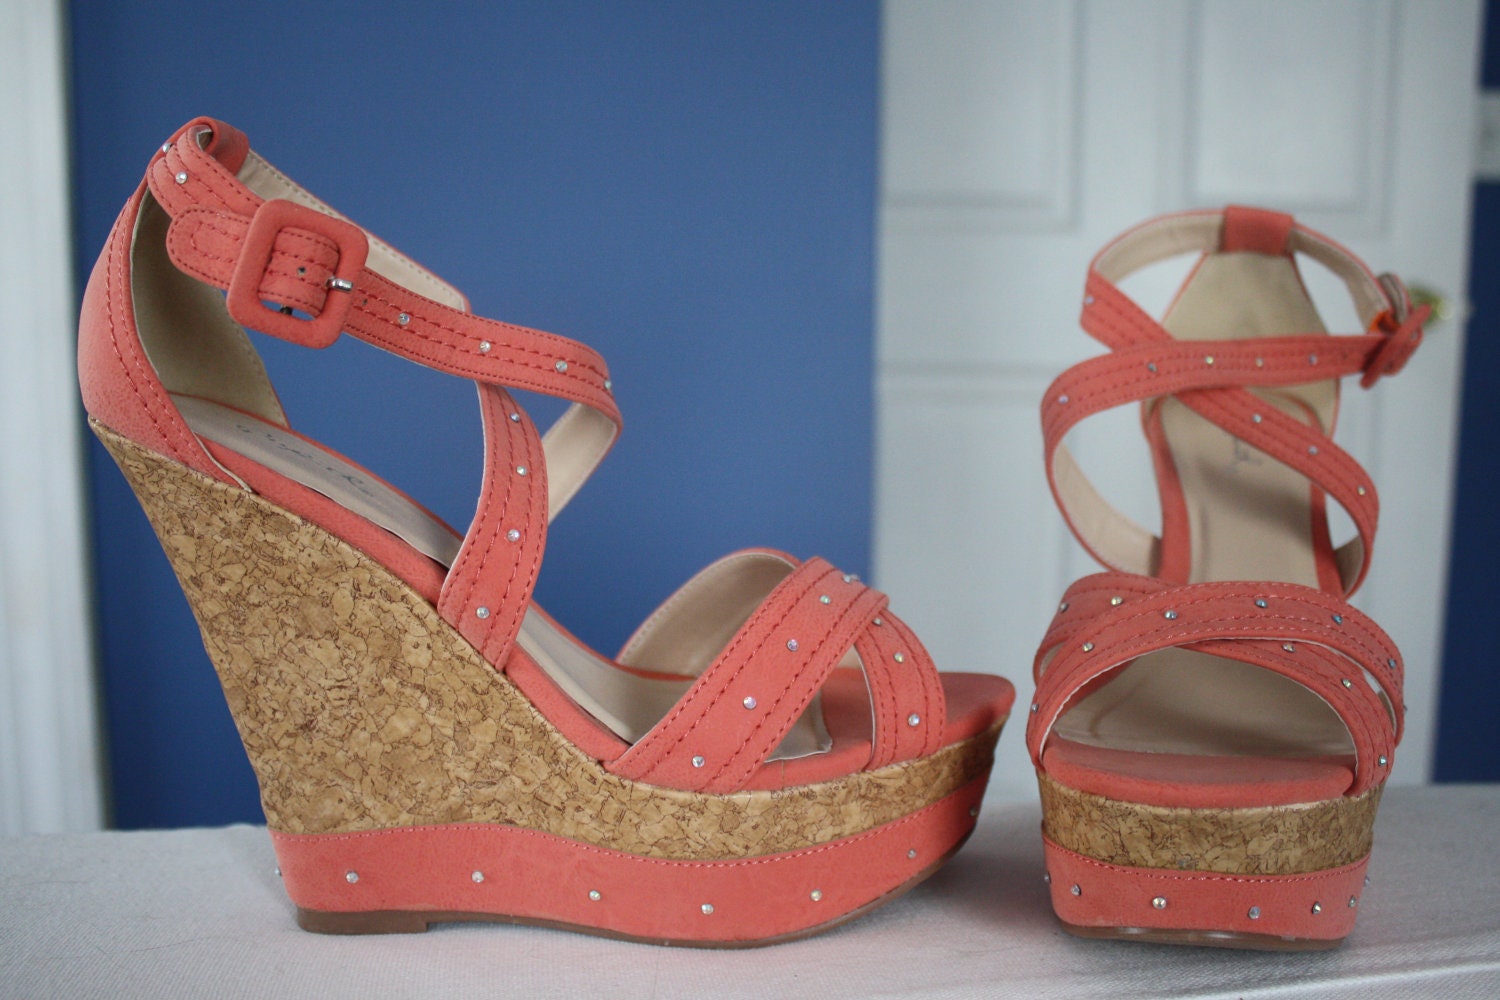 Womens spring coral wedge sandals size 8.5 by KatsGurlGear on Etsy